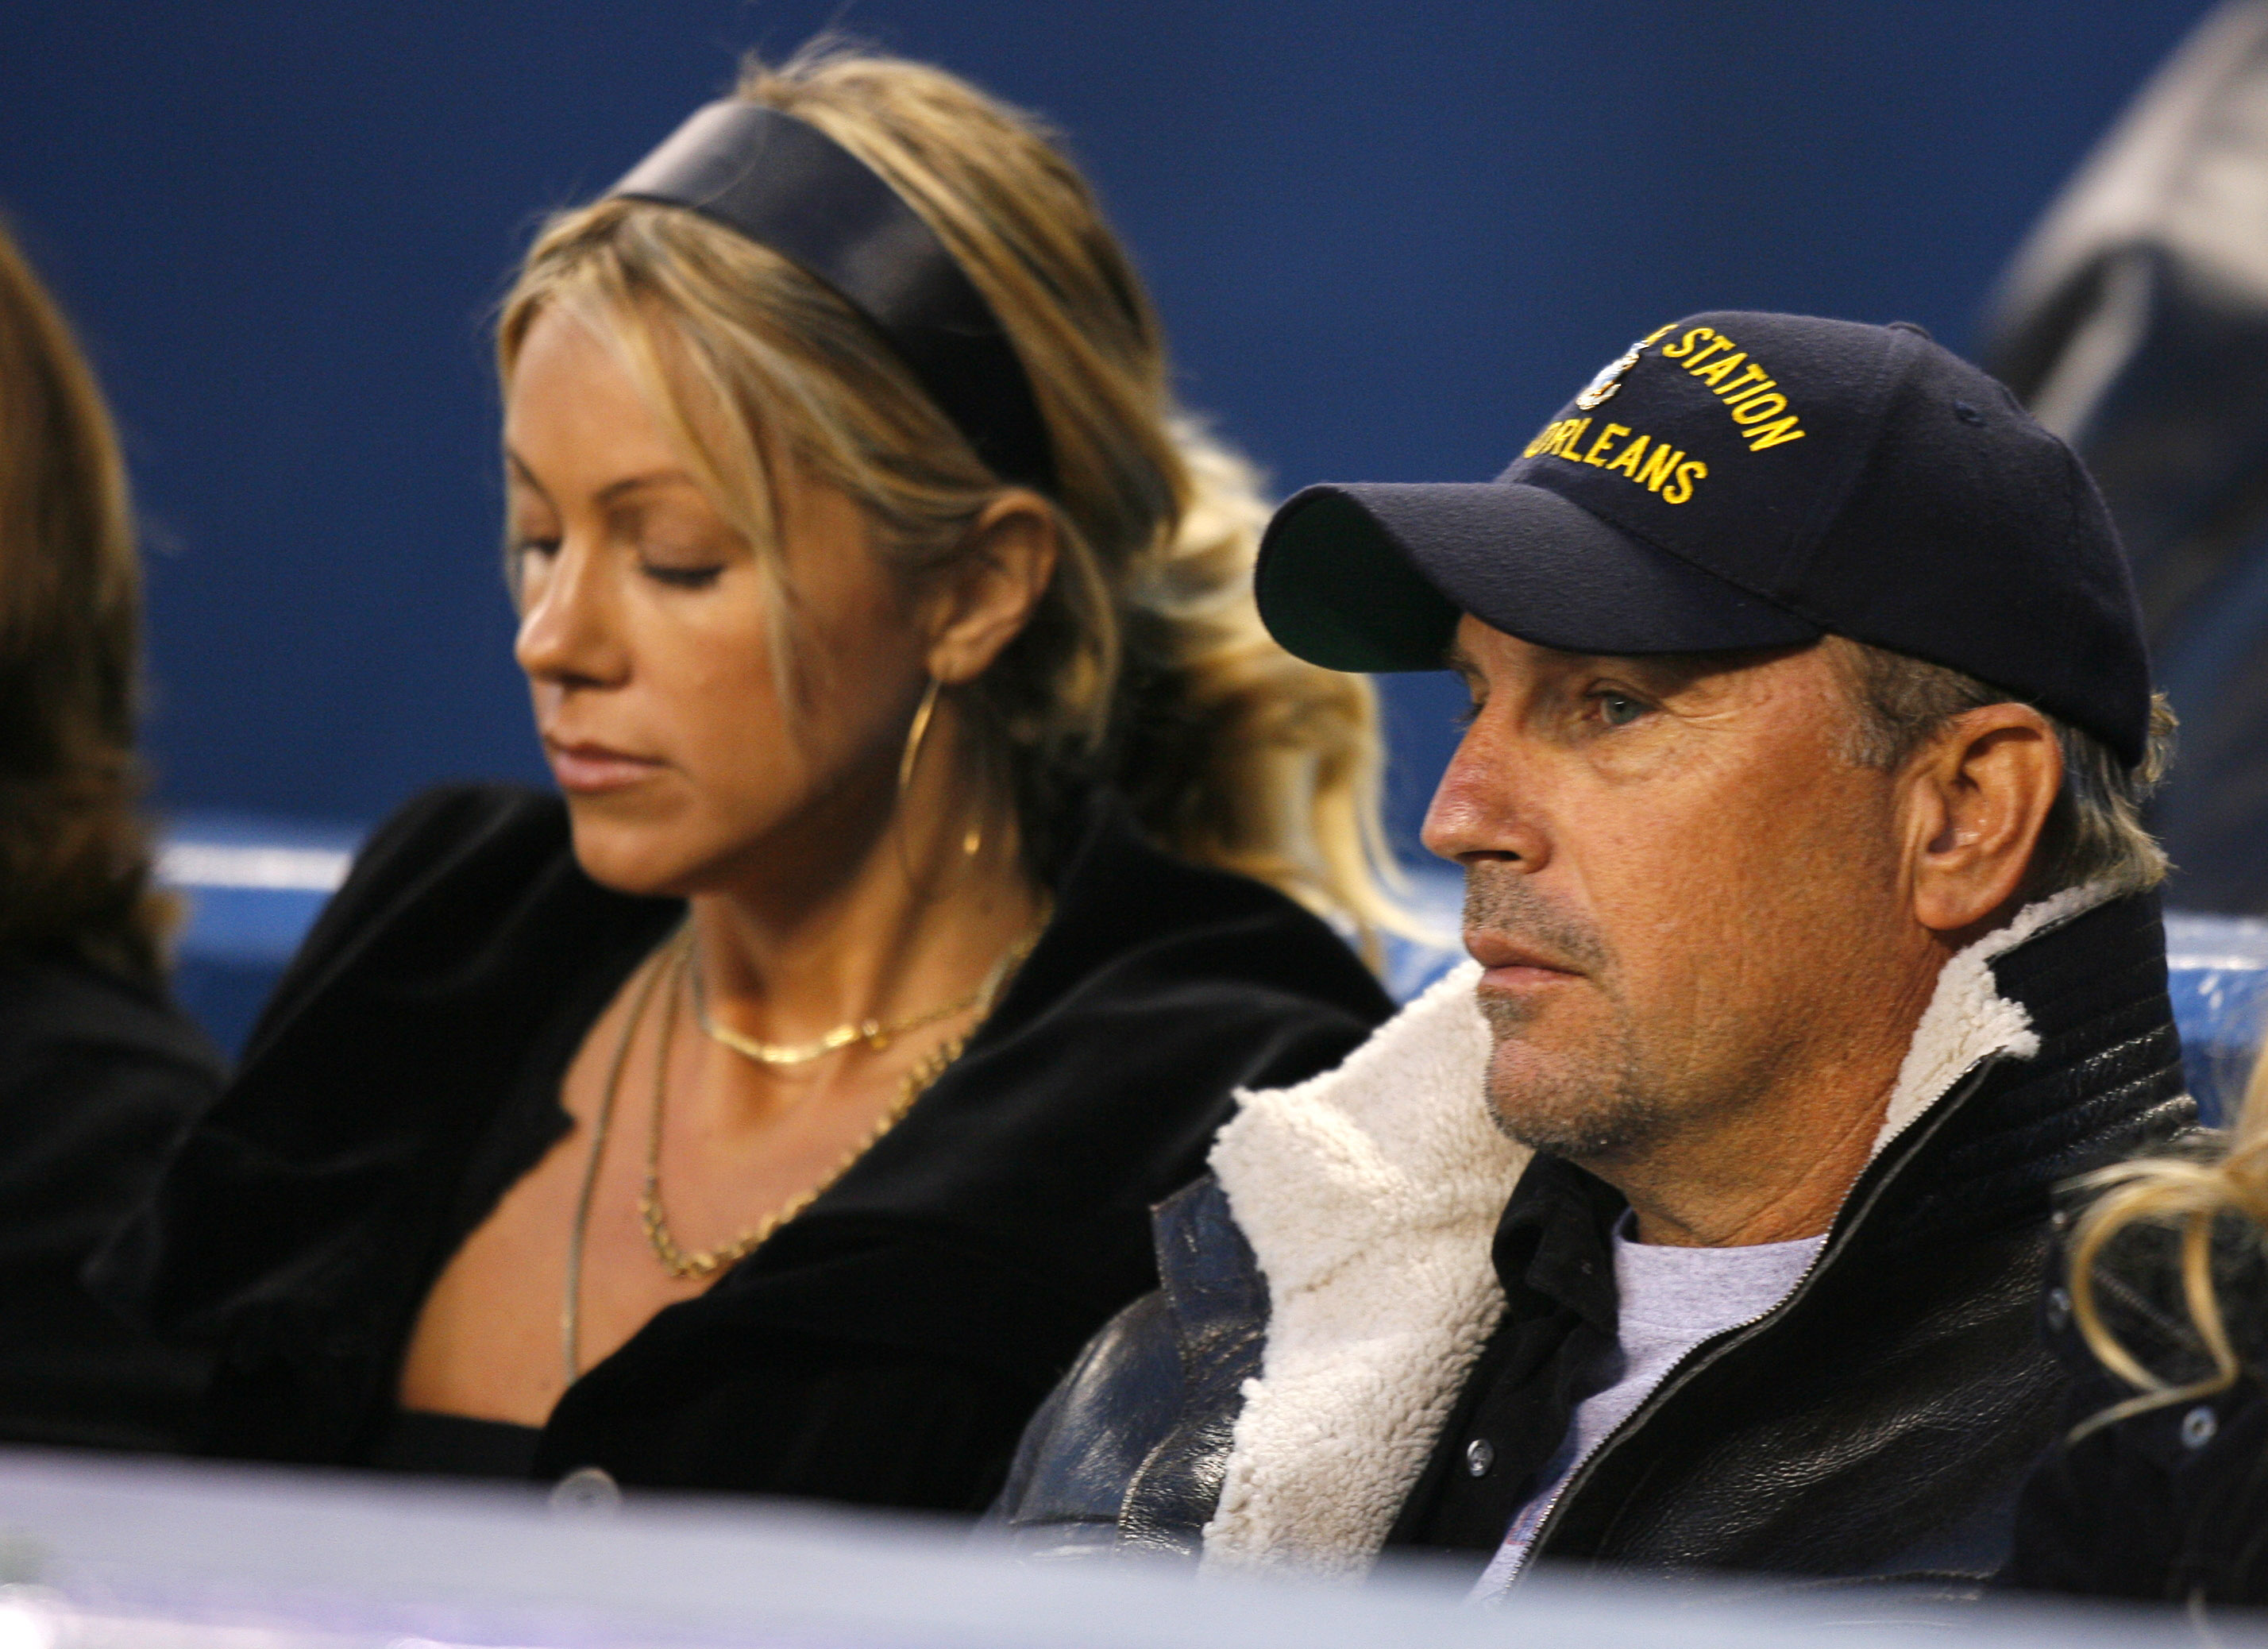 Christine Baumgartner and Kevin Costner watch a game between the New York Yankees and the Tampa Bay Devil Rays on September 12, 2006, at Yankee Stadium in the Bronx, New York. | Source: Getty Images